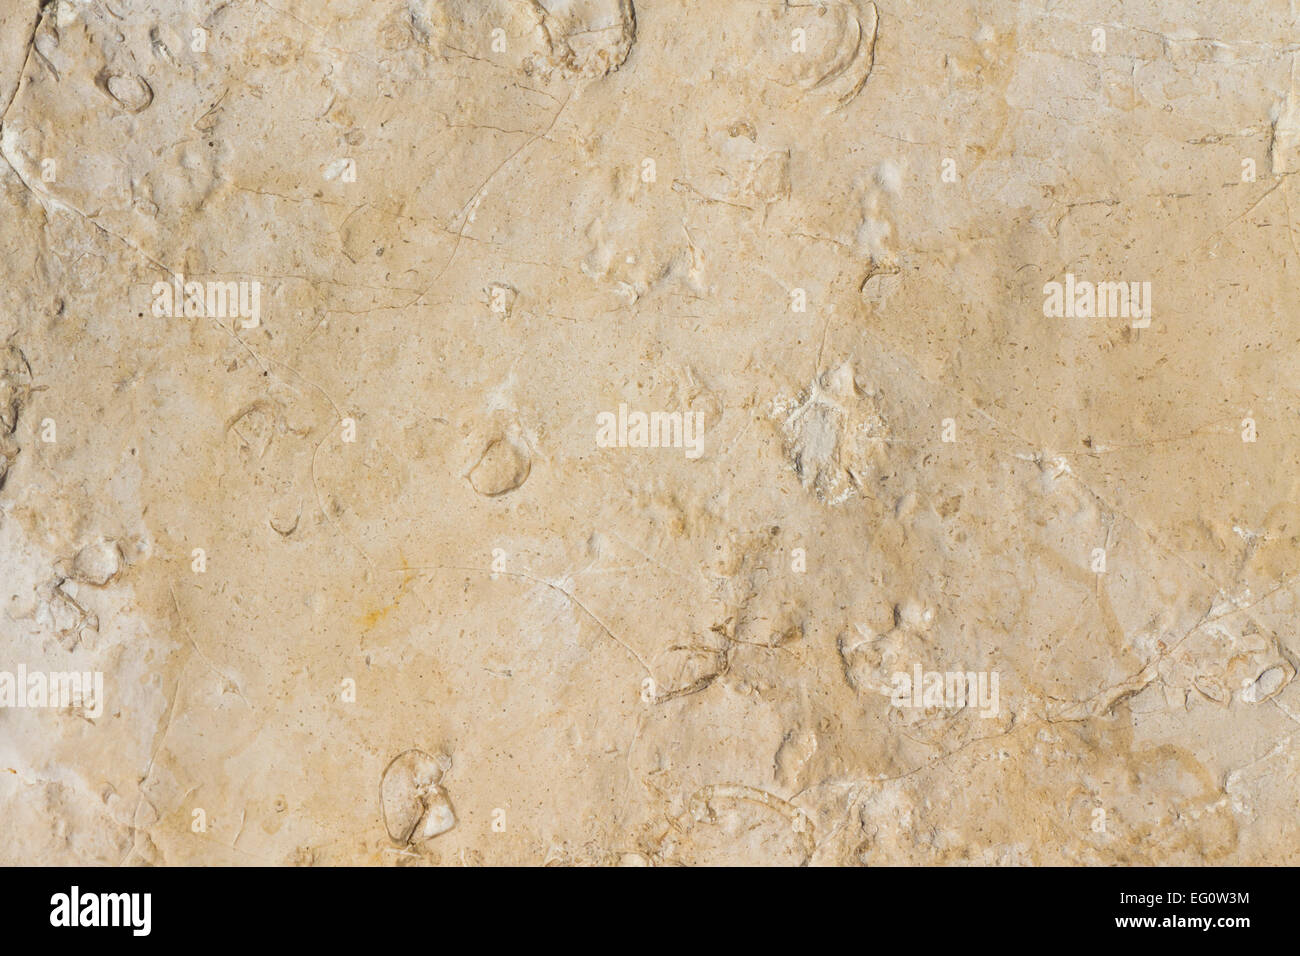 Wall image of a textured stone wall of a cliff. Can be used as a background. Stock Photo